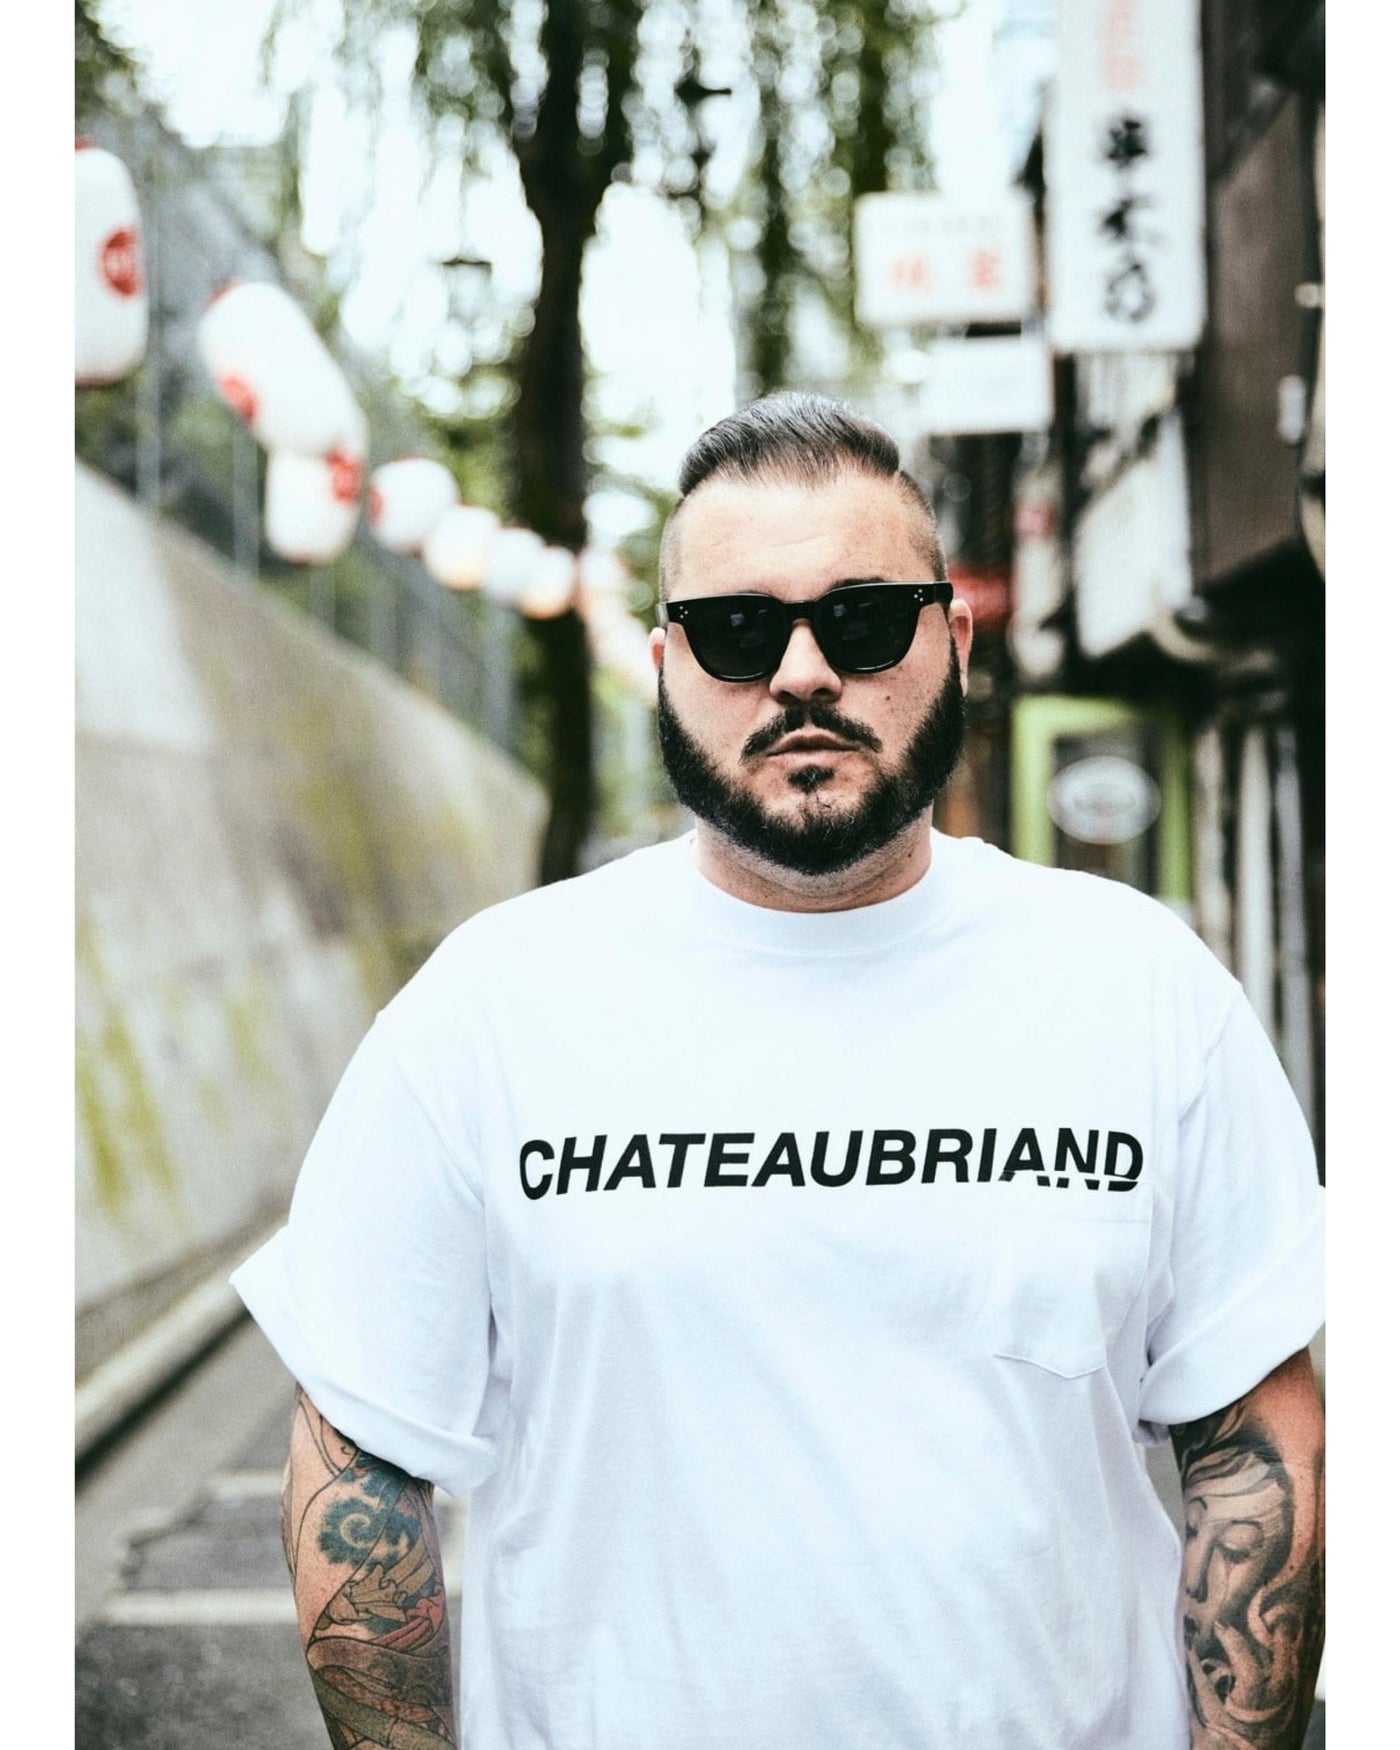 CHATEAUBRIAND SUNGLASS NOMAL TYPE